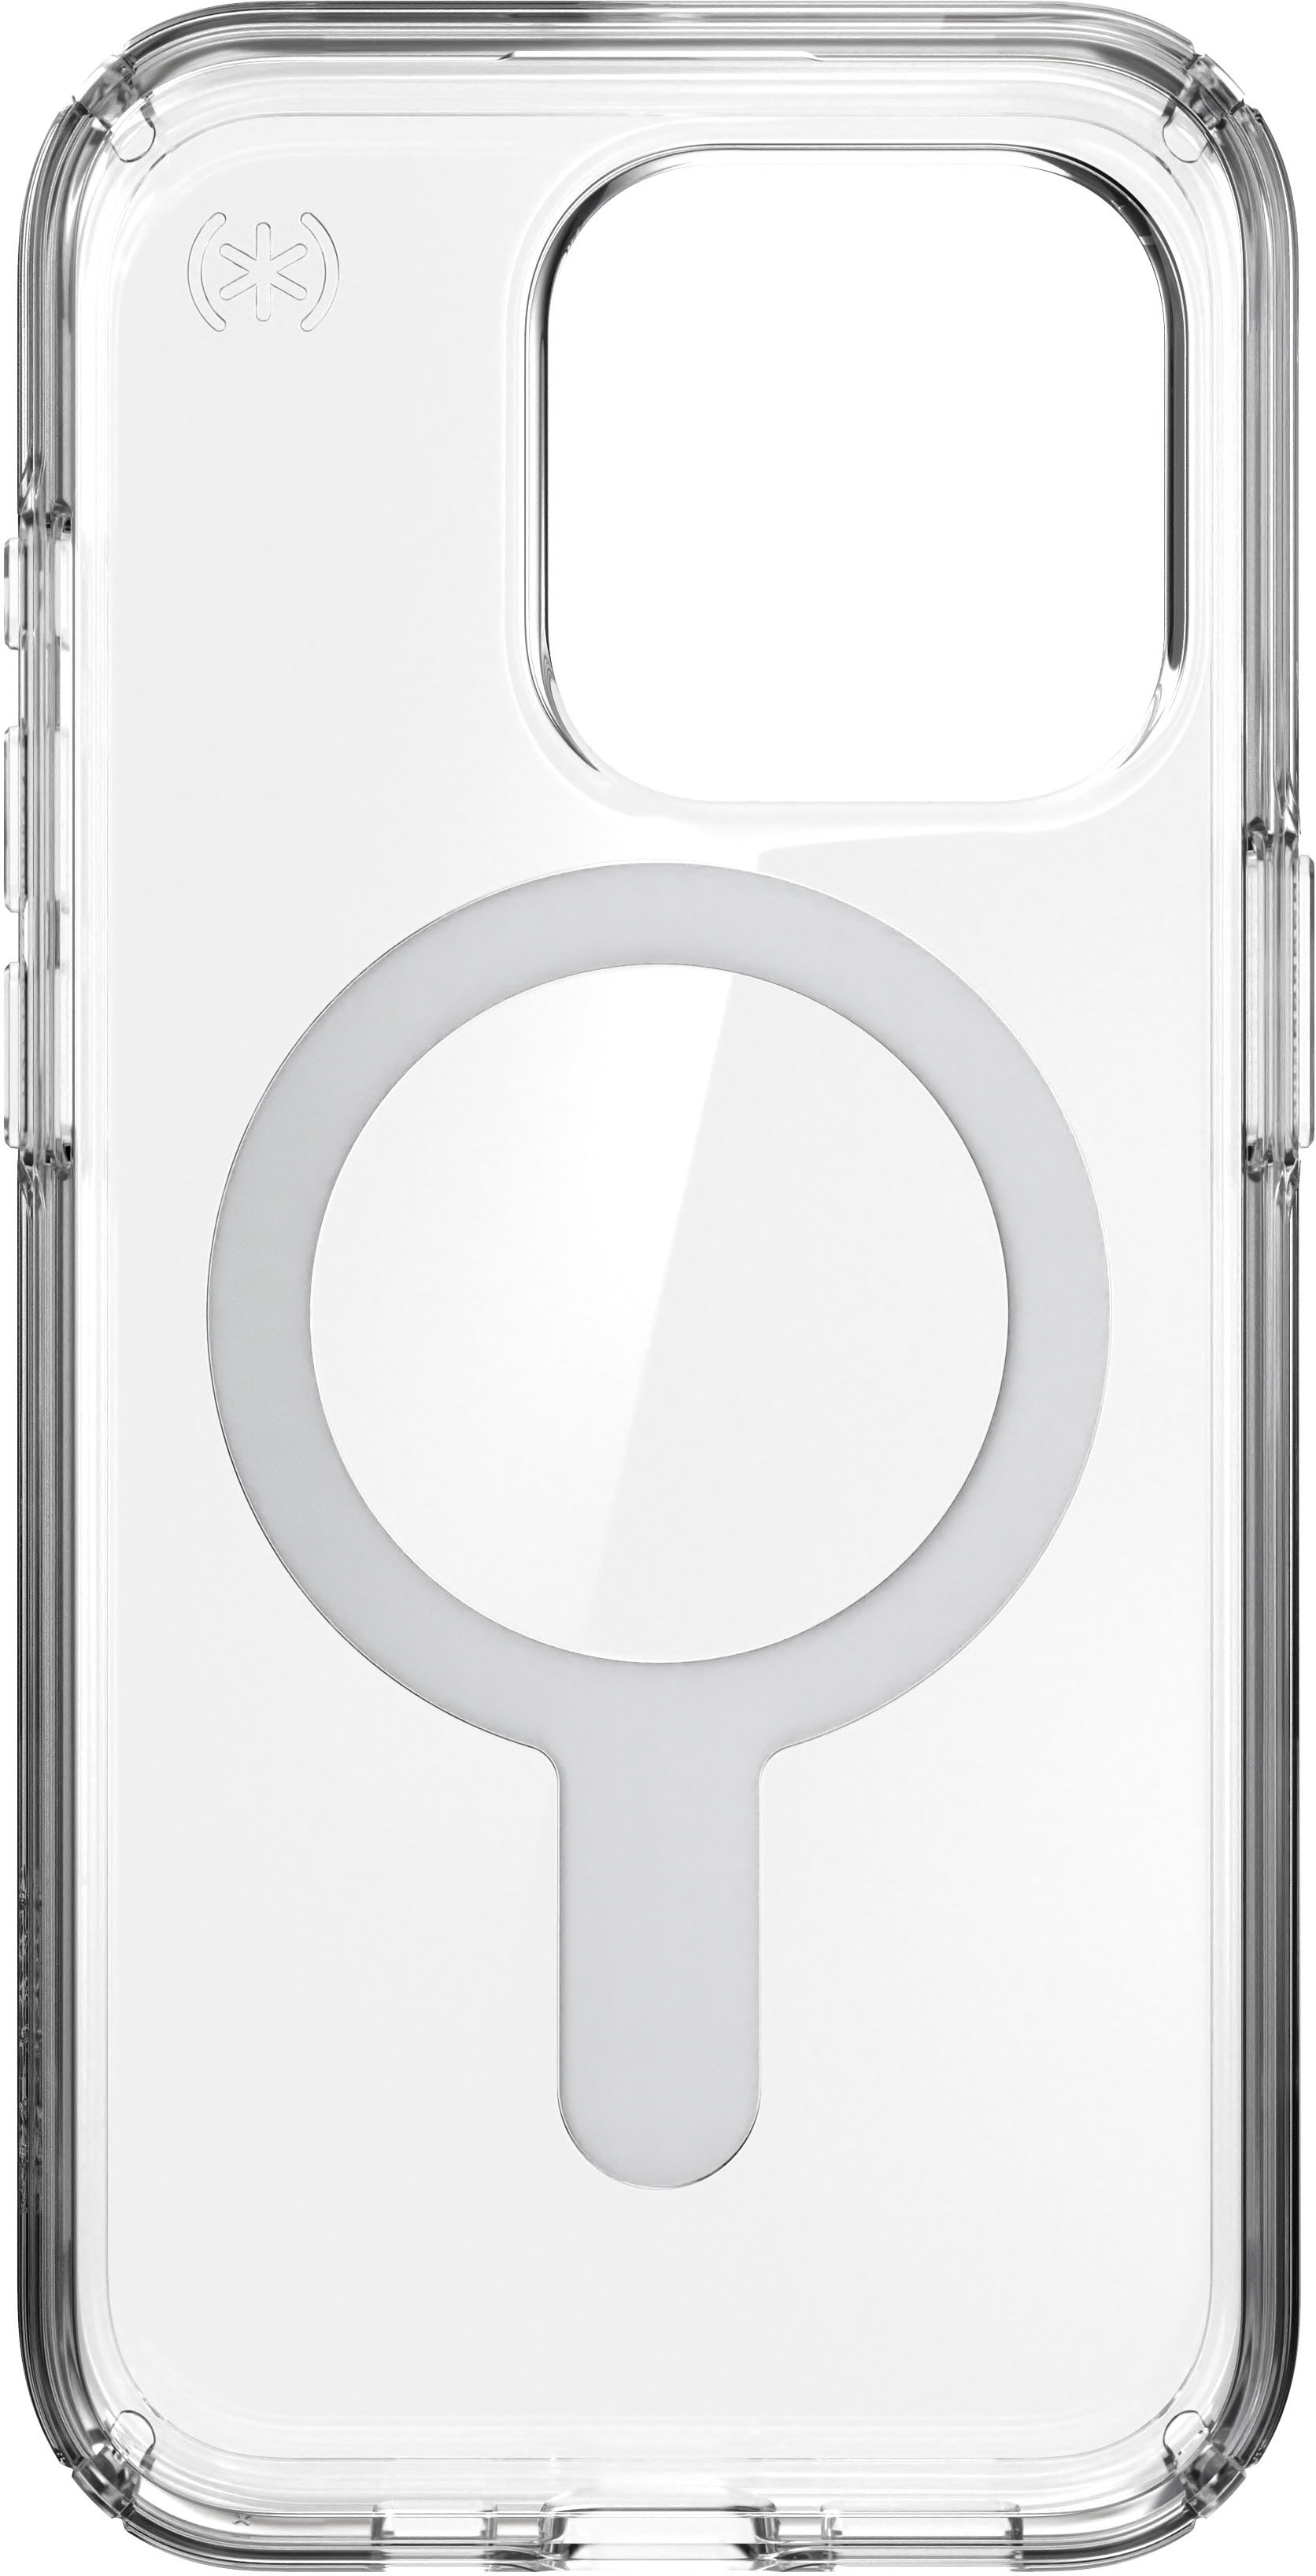 Speck Presidio Perfect-Clear ClickLock Case with MagSafe for Apple iPhone  15 Pro Max Clear/Chrome 150465-3199 - Best Buy